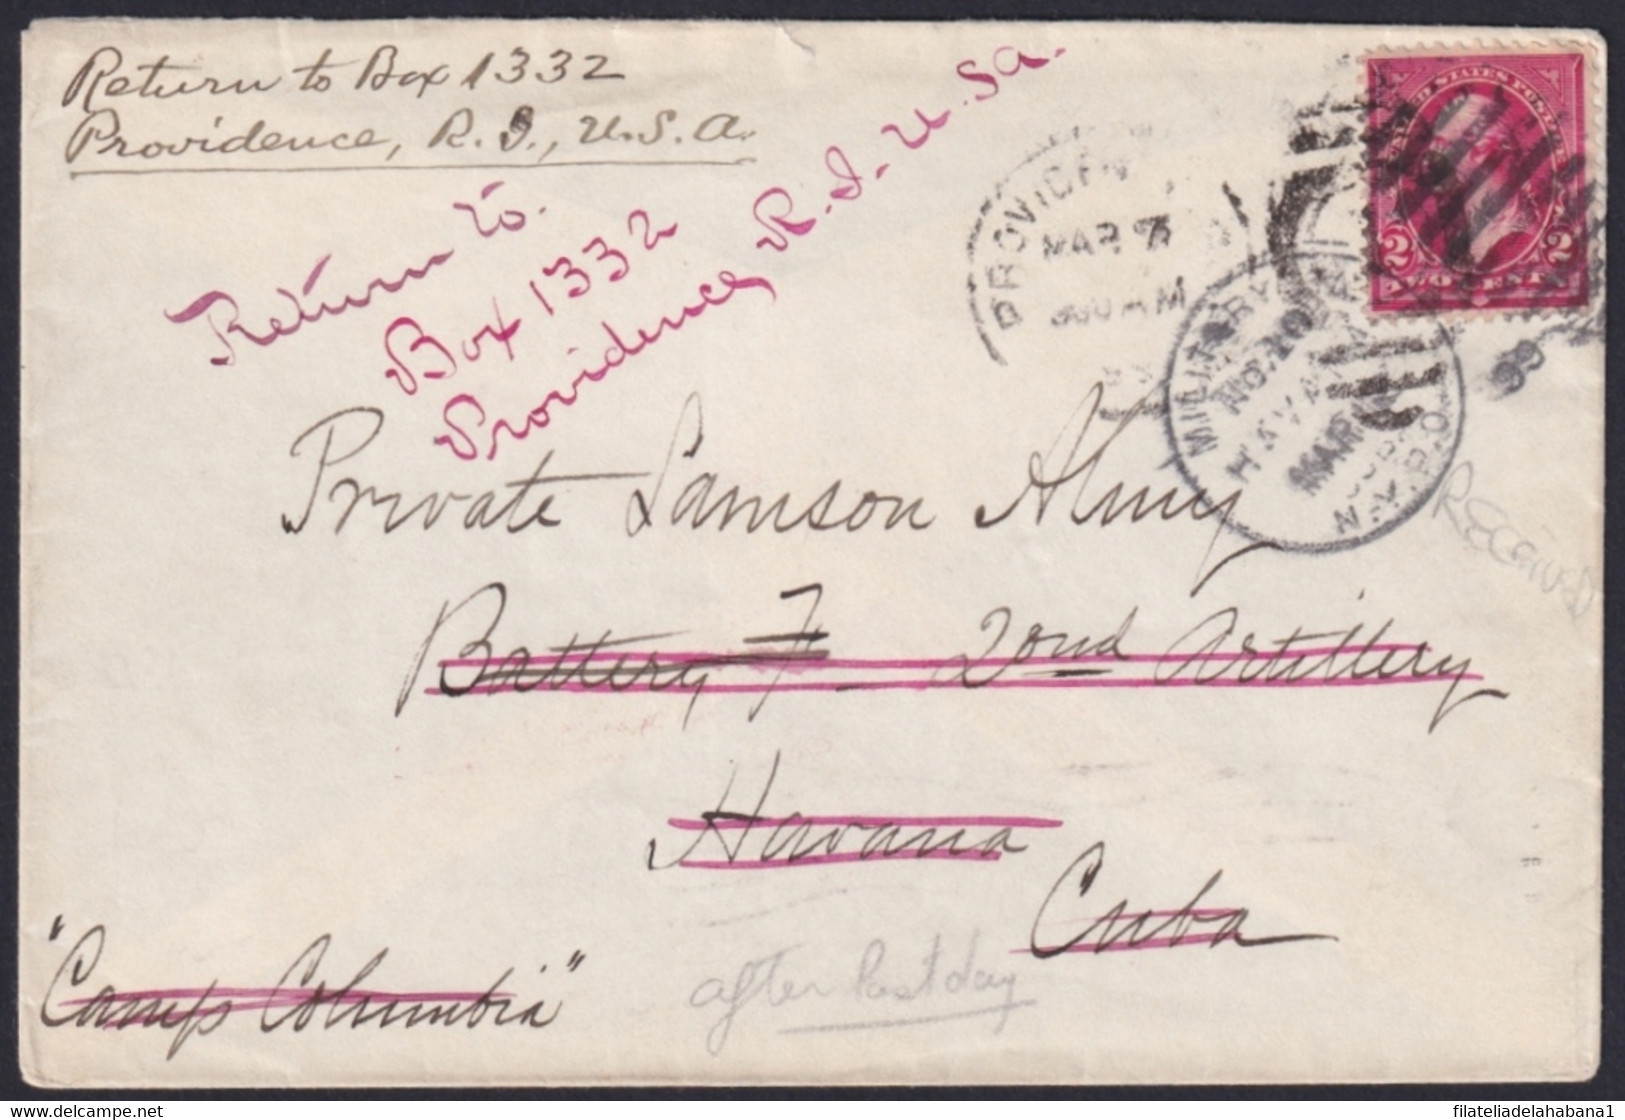 1899-H-257 CUBA US OCCUPATION 1899 MILITAR STATION HAVANA RETURNED COVER TO US. - Covers & Documents